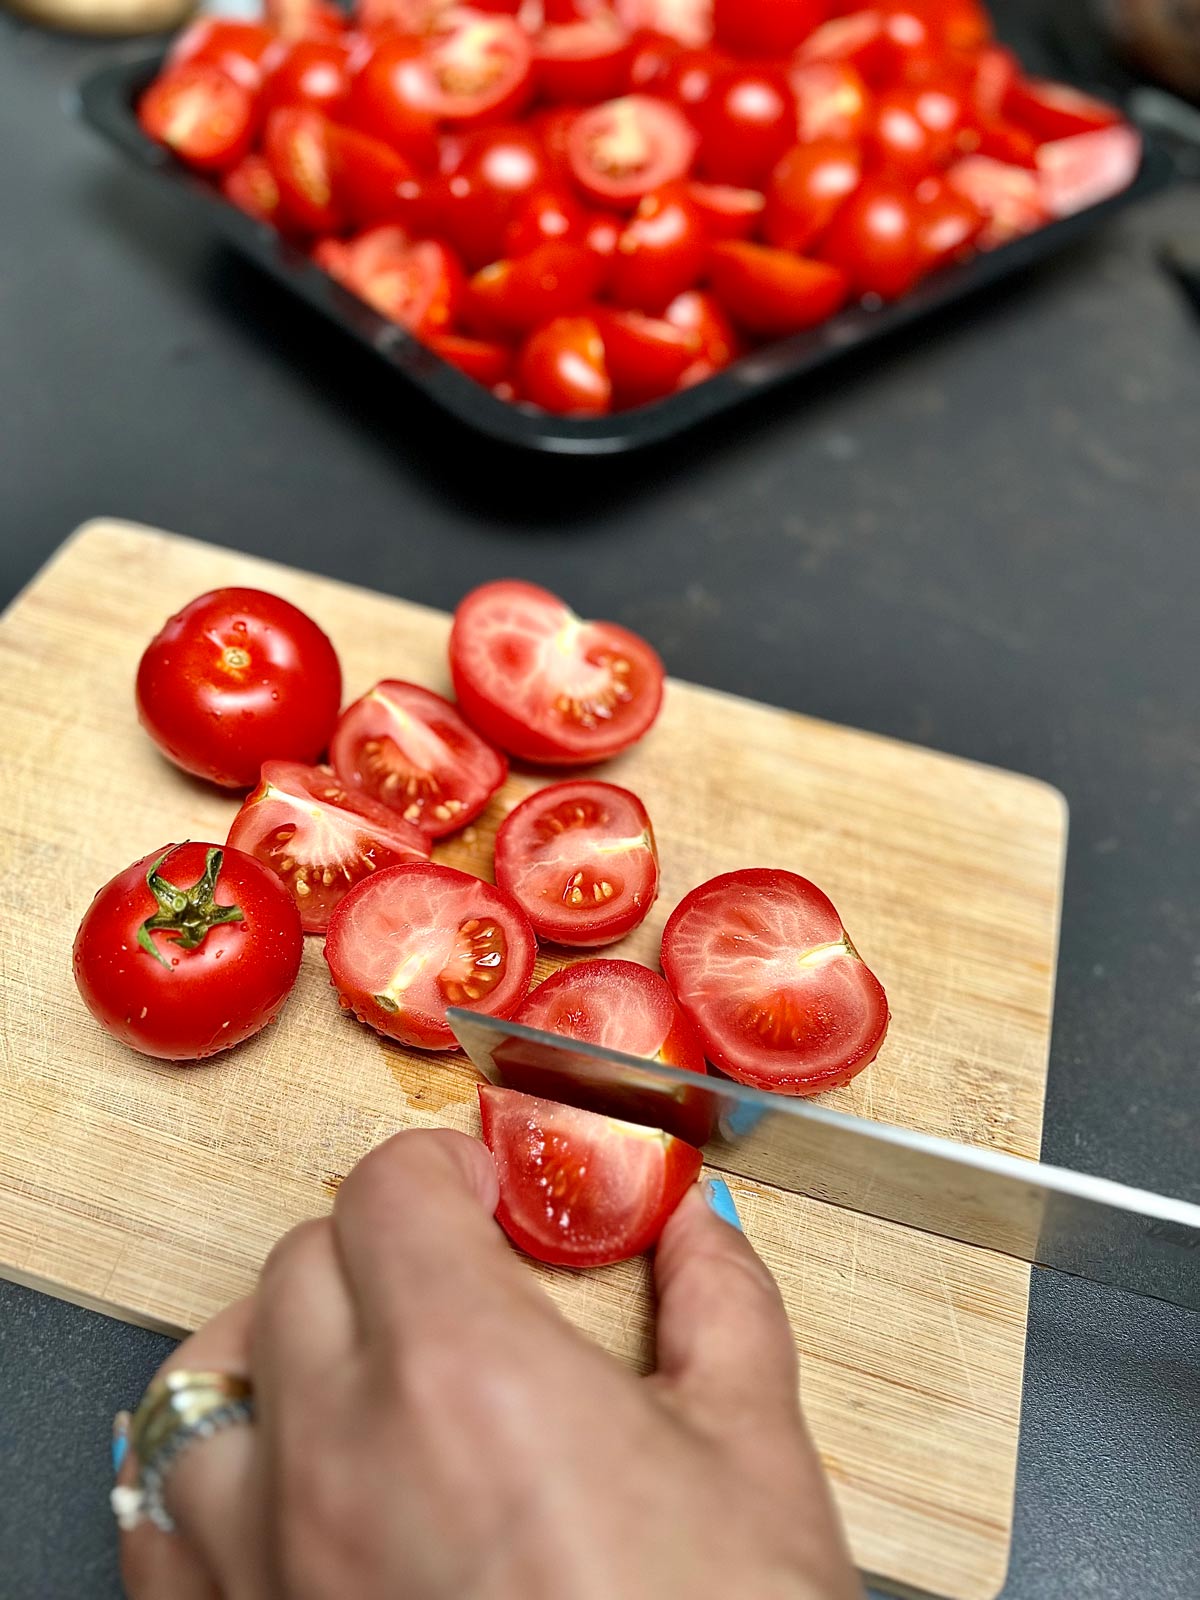 Whole tomatoes, halves and quarters on a wooden chopping board being prepared to make passata.